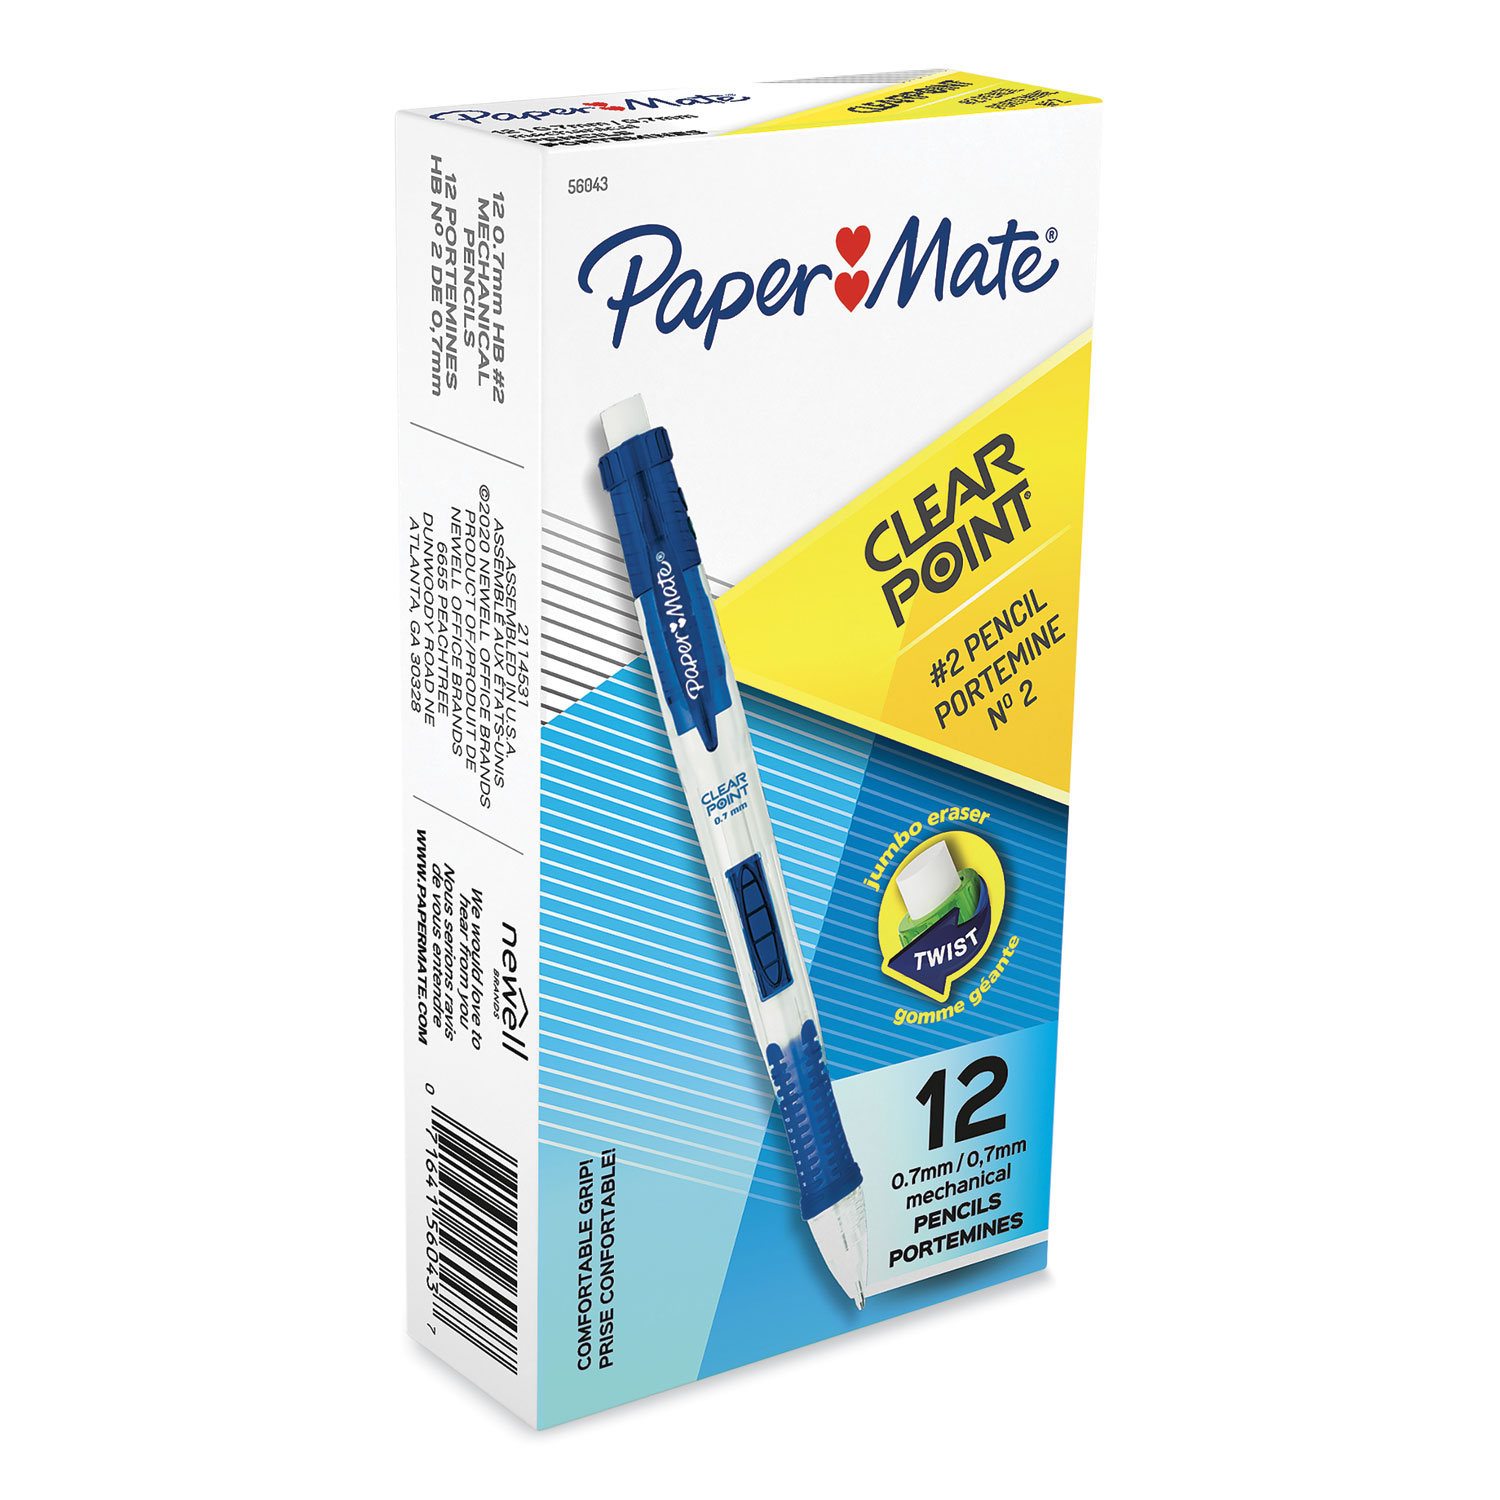 Paper Mate® Clearpoint® Mechanical Pencils, HB #2 Lead (0.7mm), Assorted  Barrel Colors, 10 Count 